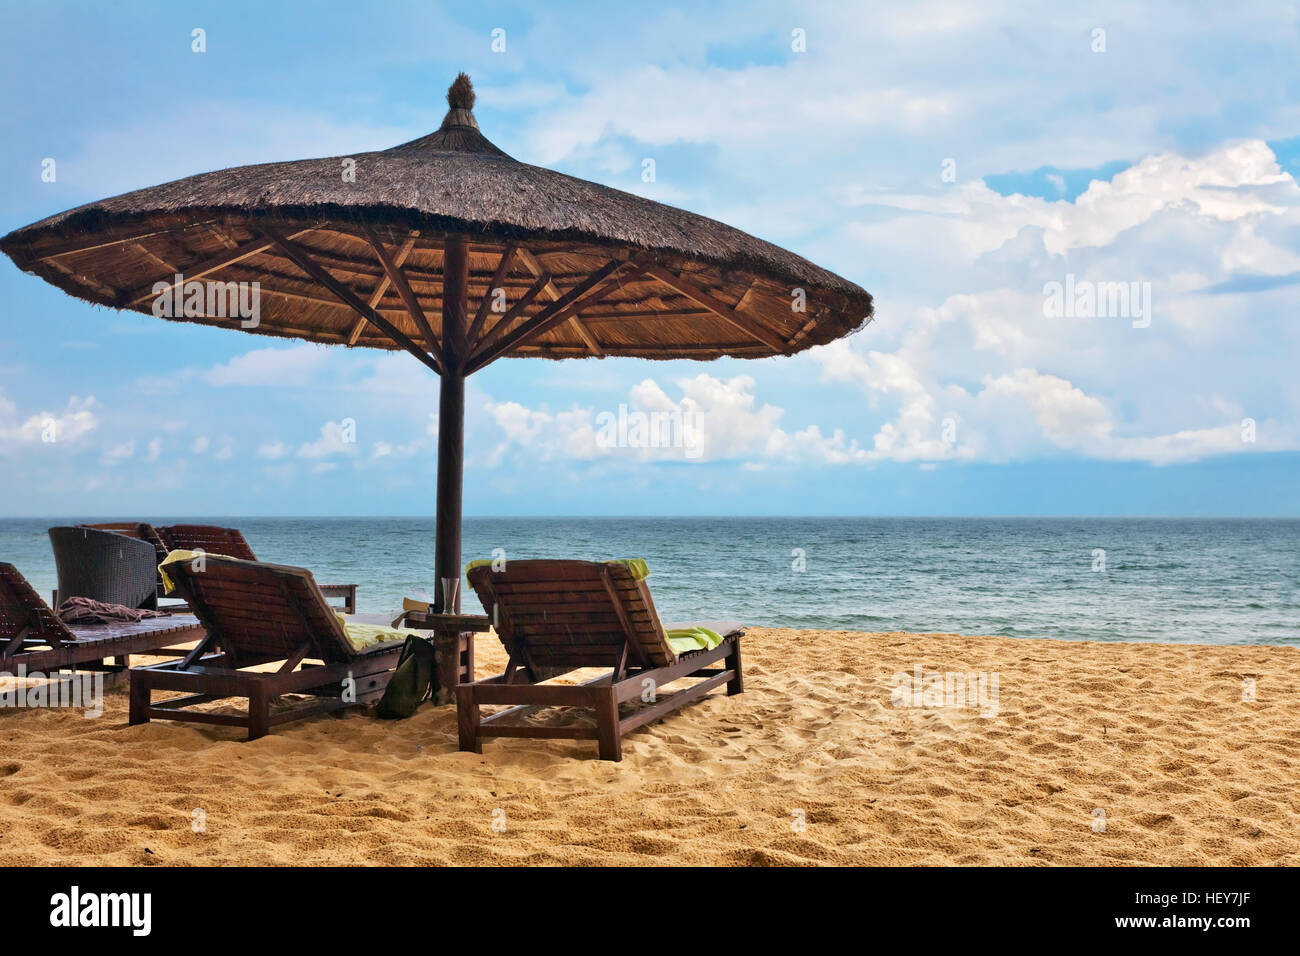 Wooden chairs and umbrellas on white sand beach at Phu Quoc island in Vietnam Stock Photo